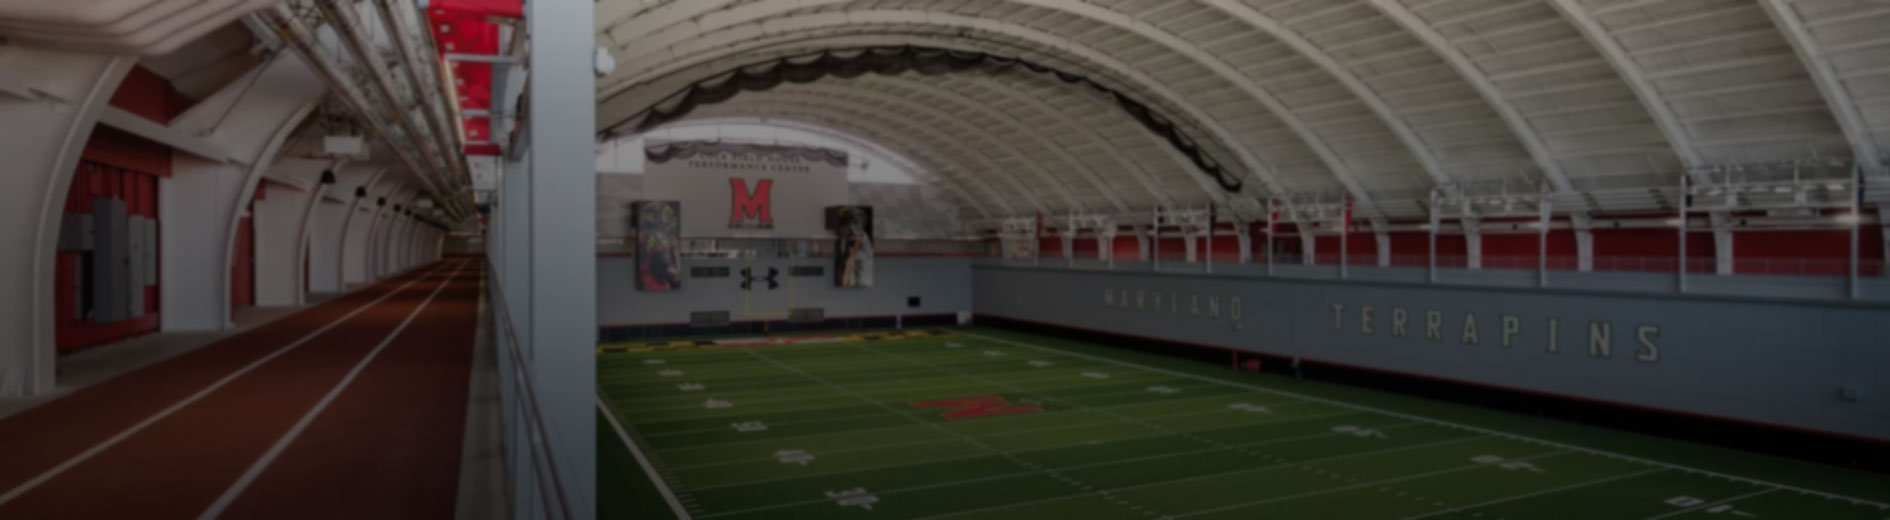 The University of Maryland Cole Field House in College Park, Maryland.